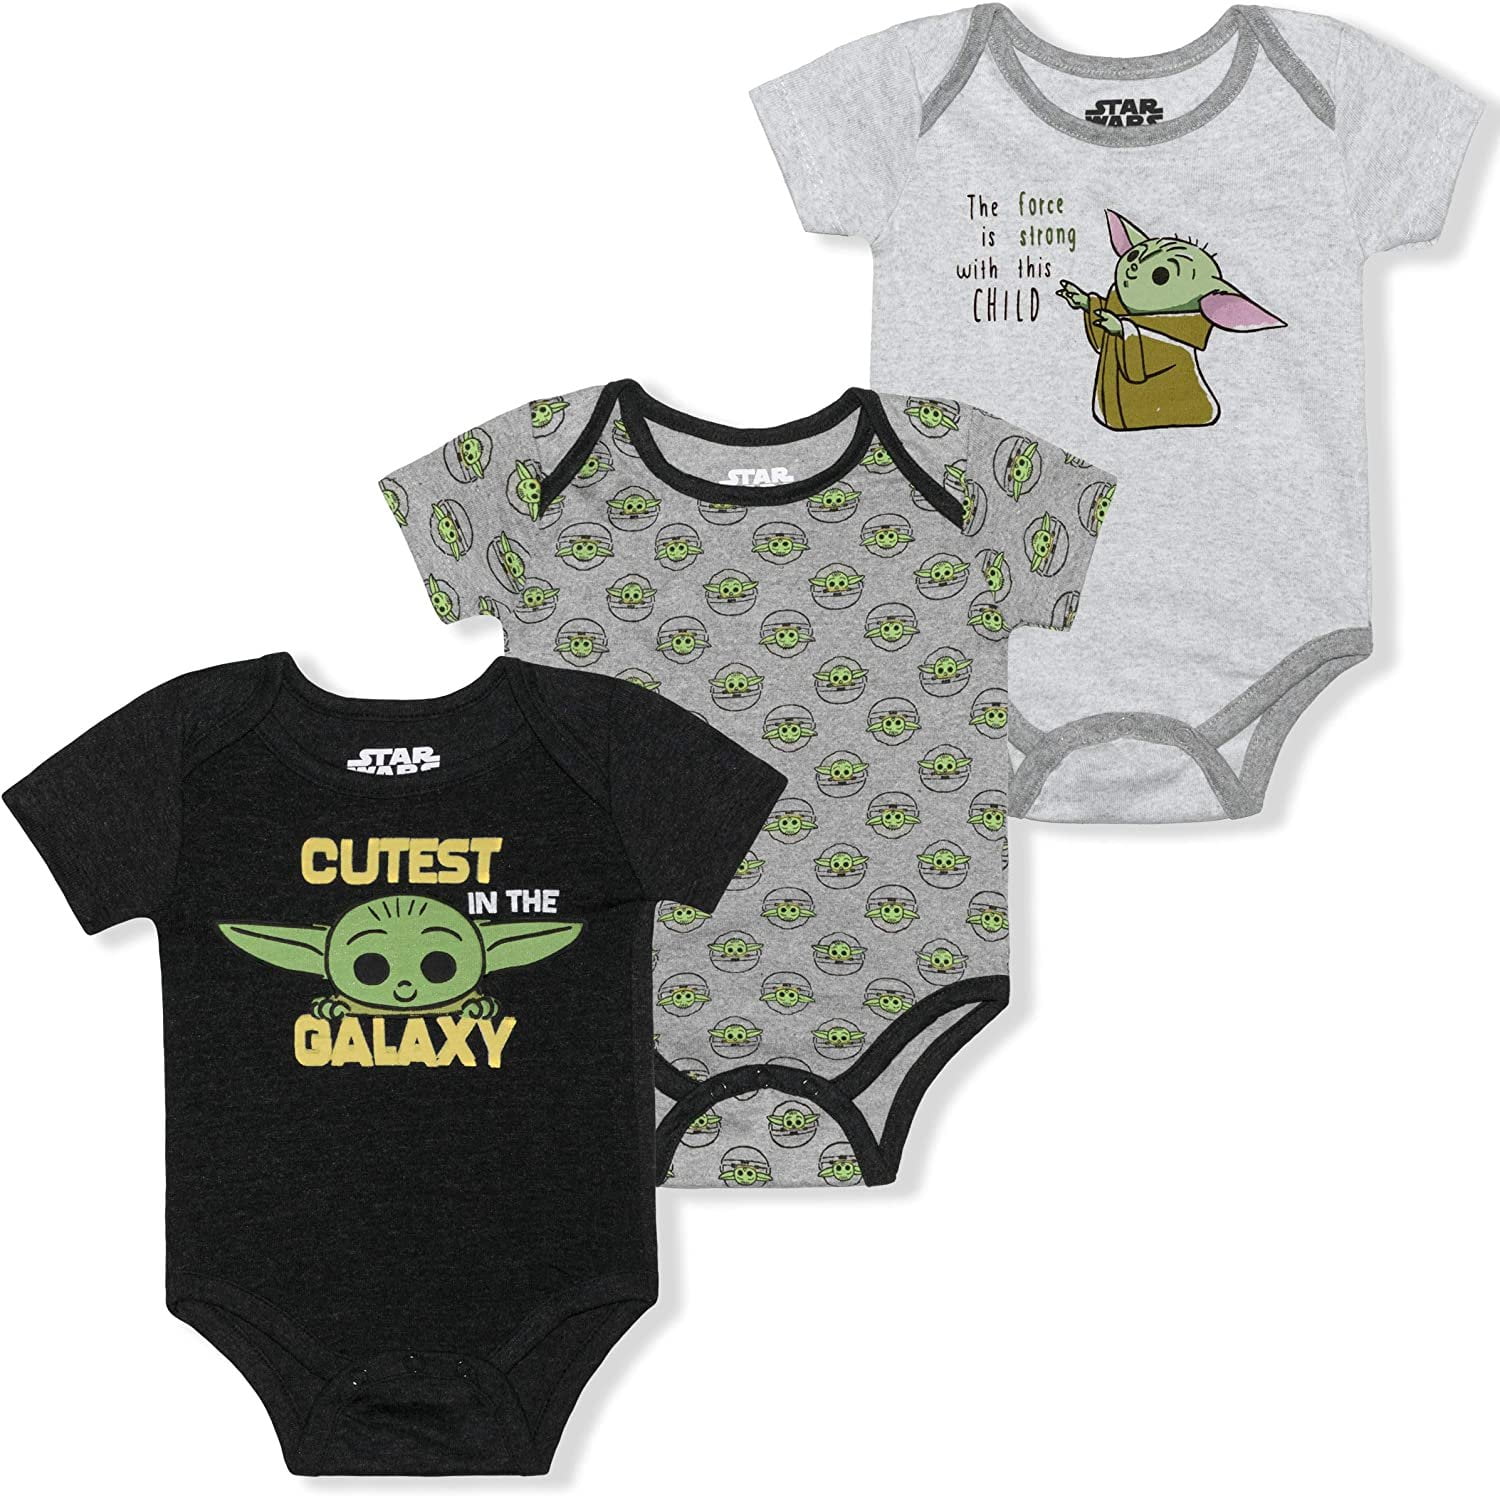 Star Wars Toddler and Infant The Mandalorian Baby Yoda Cutest in The Galaxy Onesie Pajama Sleeper Outfit 